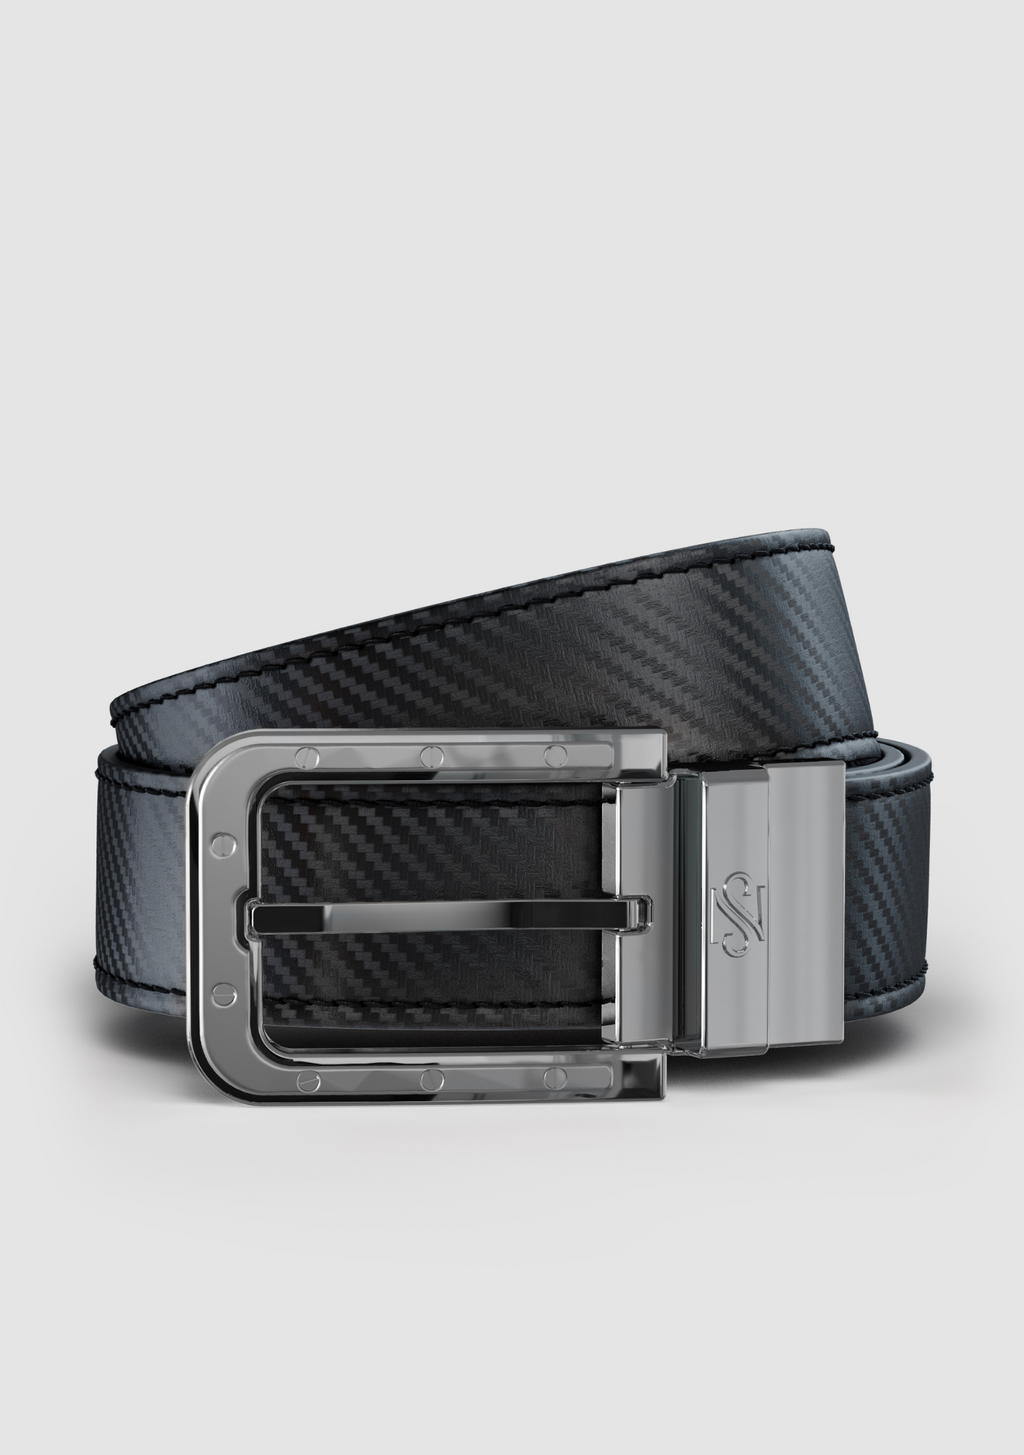 Obsidian Finery: Black with Pattern Leather Belt, An Essential Accessory for Effortless Versatility and Sophistication. Mens Stretch Belts, Brown